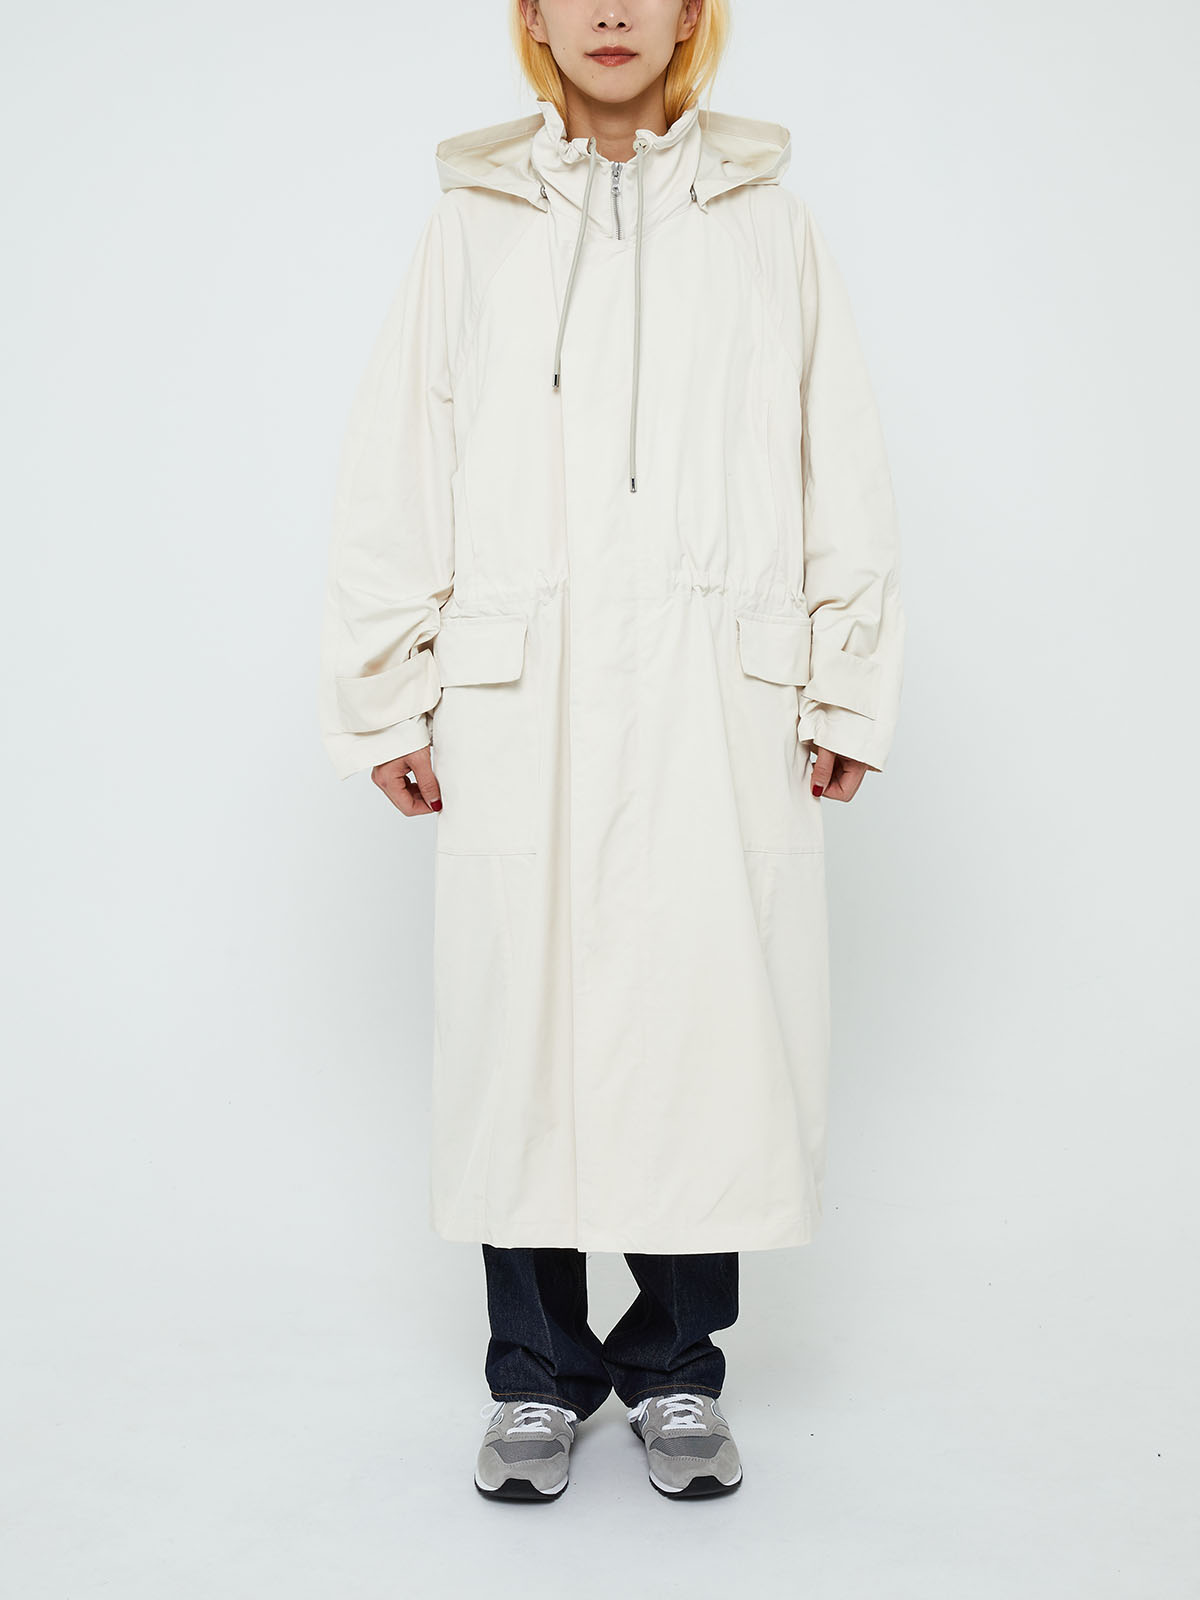 HIGH DENSITY COTTON POLYESTER CLOTH HOODED COAT (IVORY)